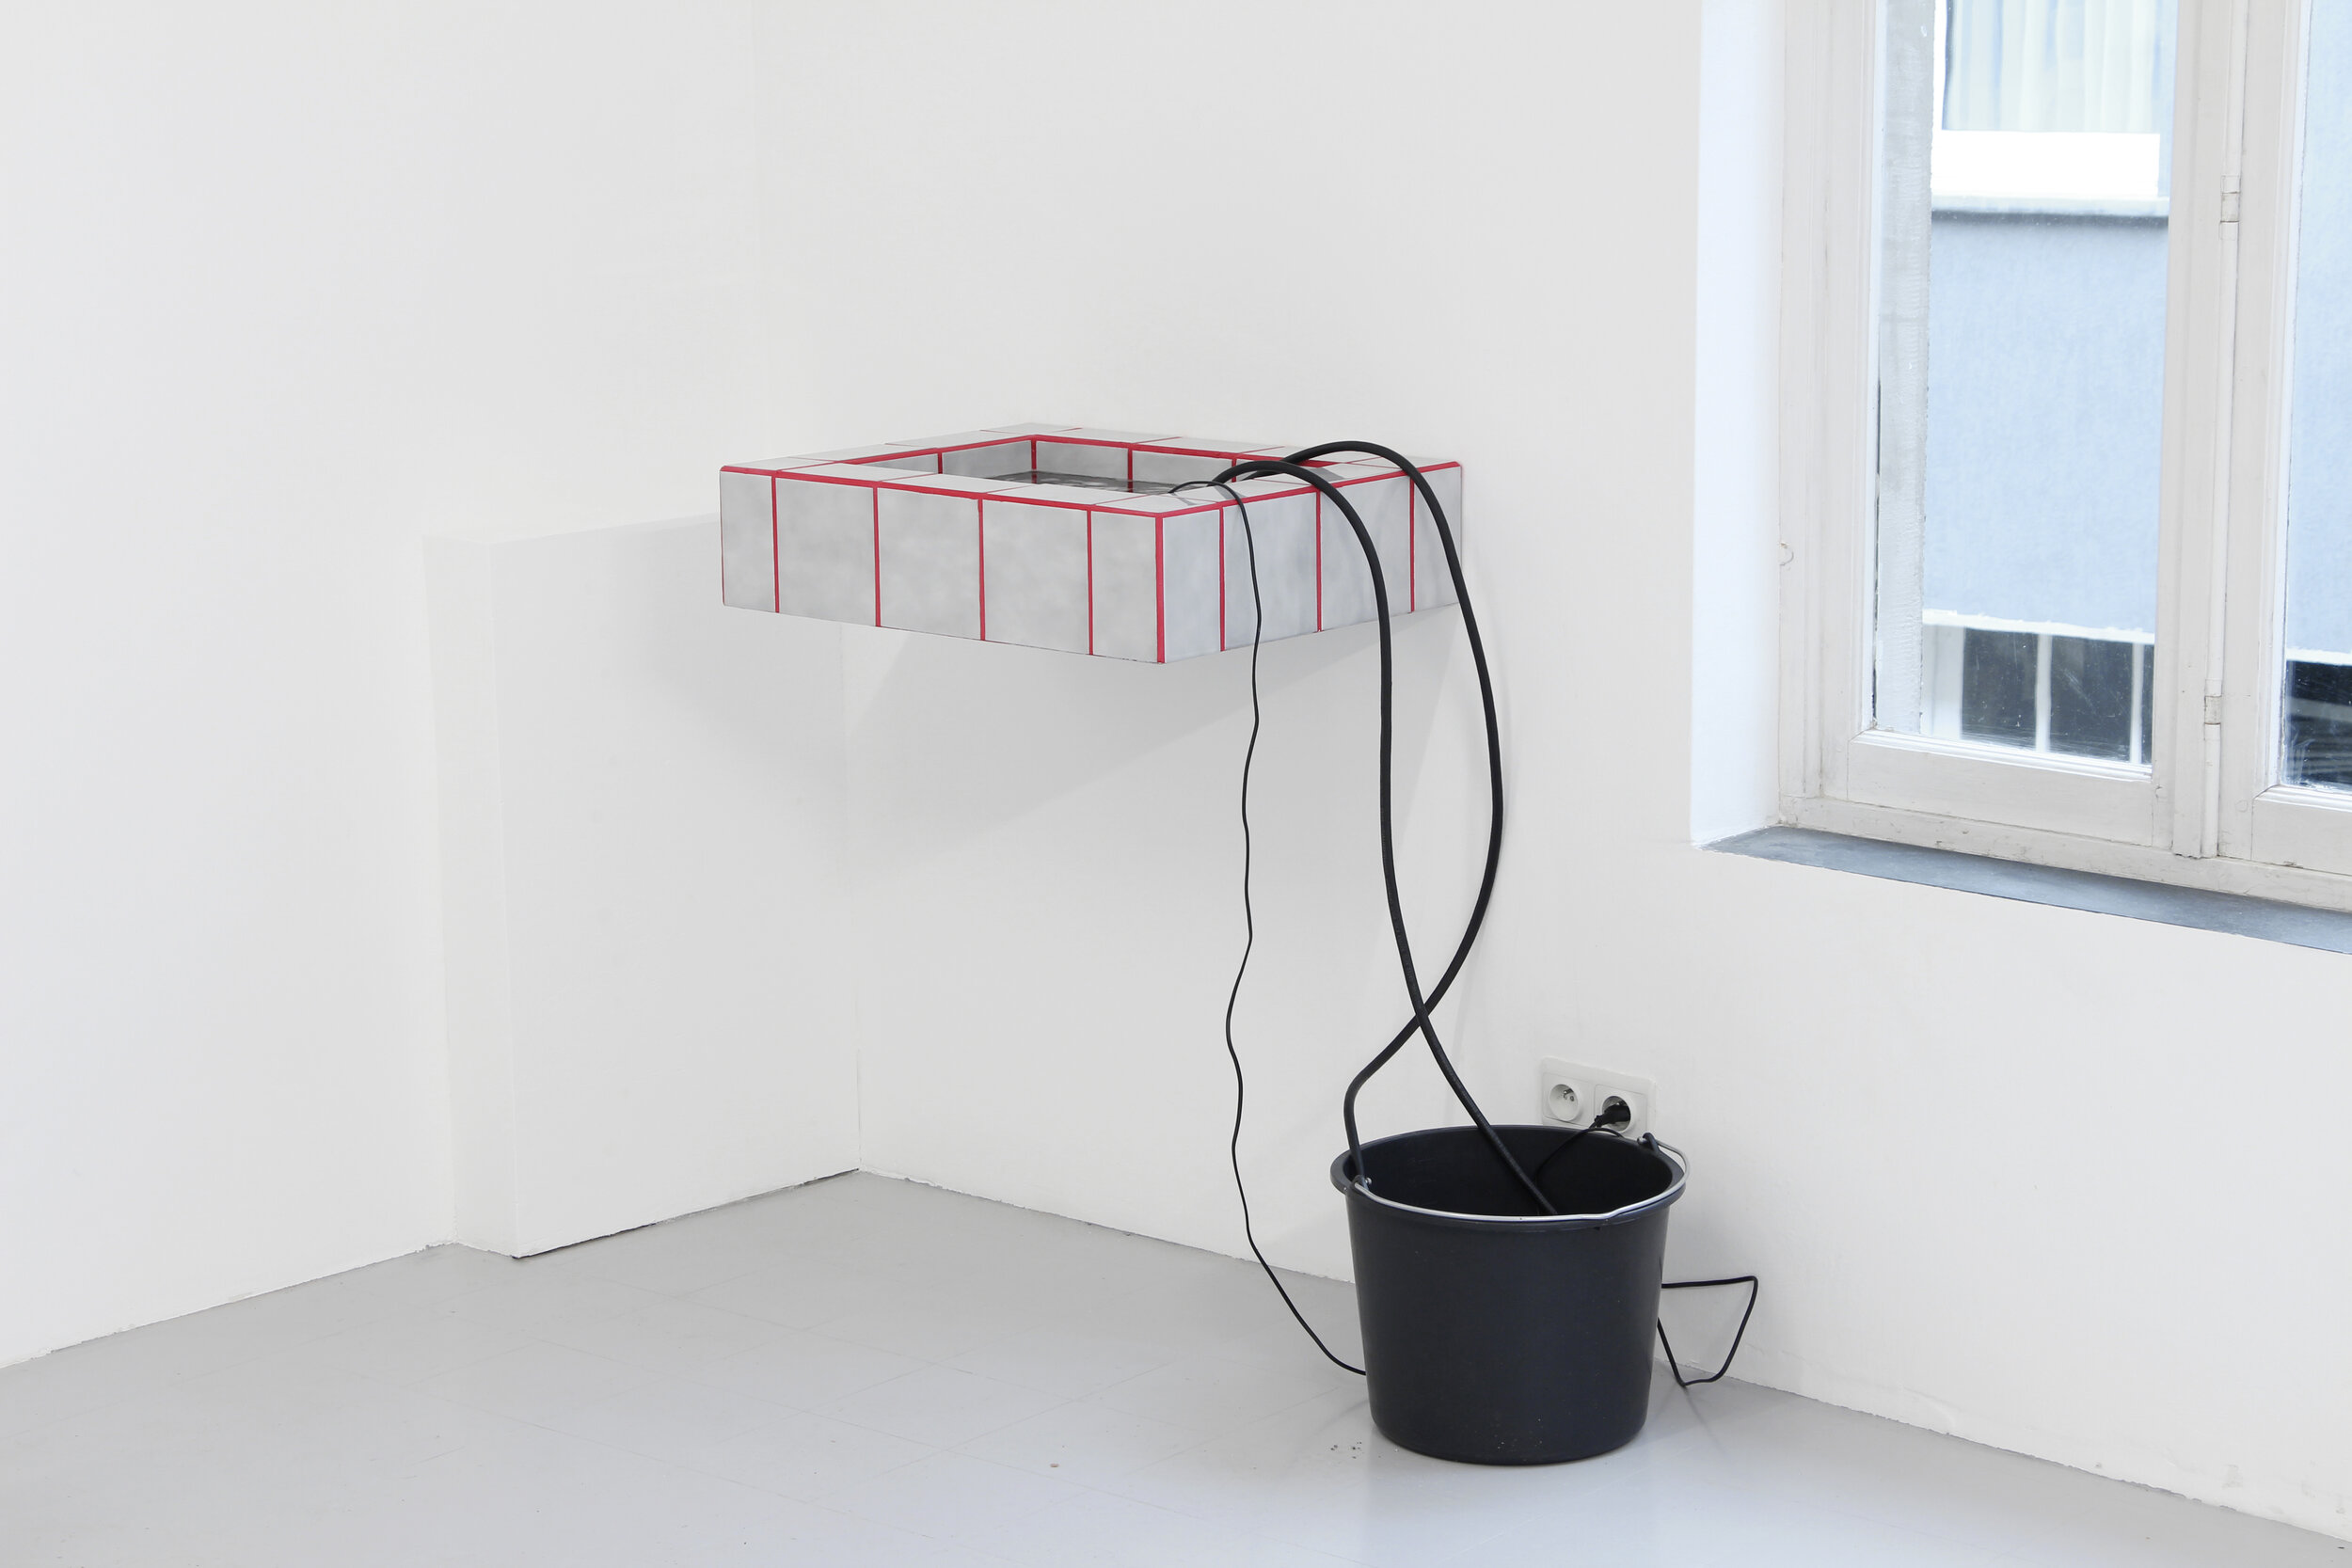   Agua de frijoles , bean infused water, tile fountain, pumps and cables, plactic bucket, size variable, Canopy Gallery, Brussels, 2016 